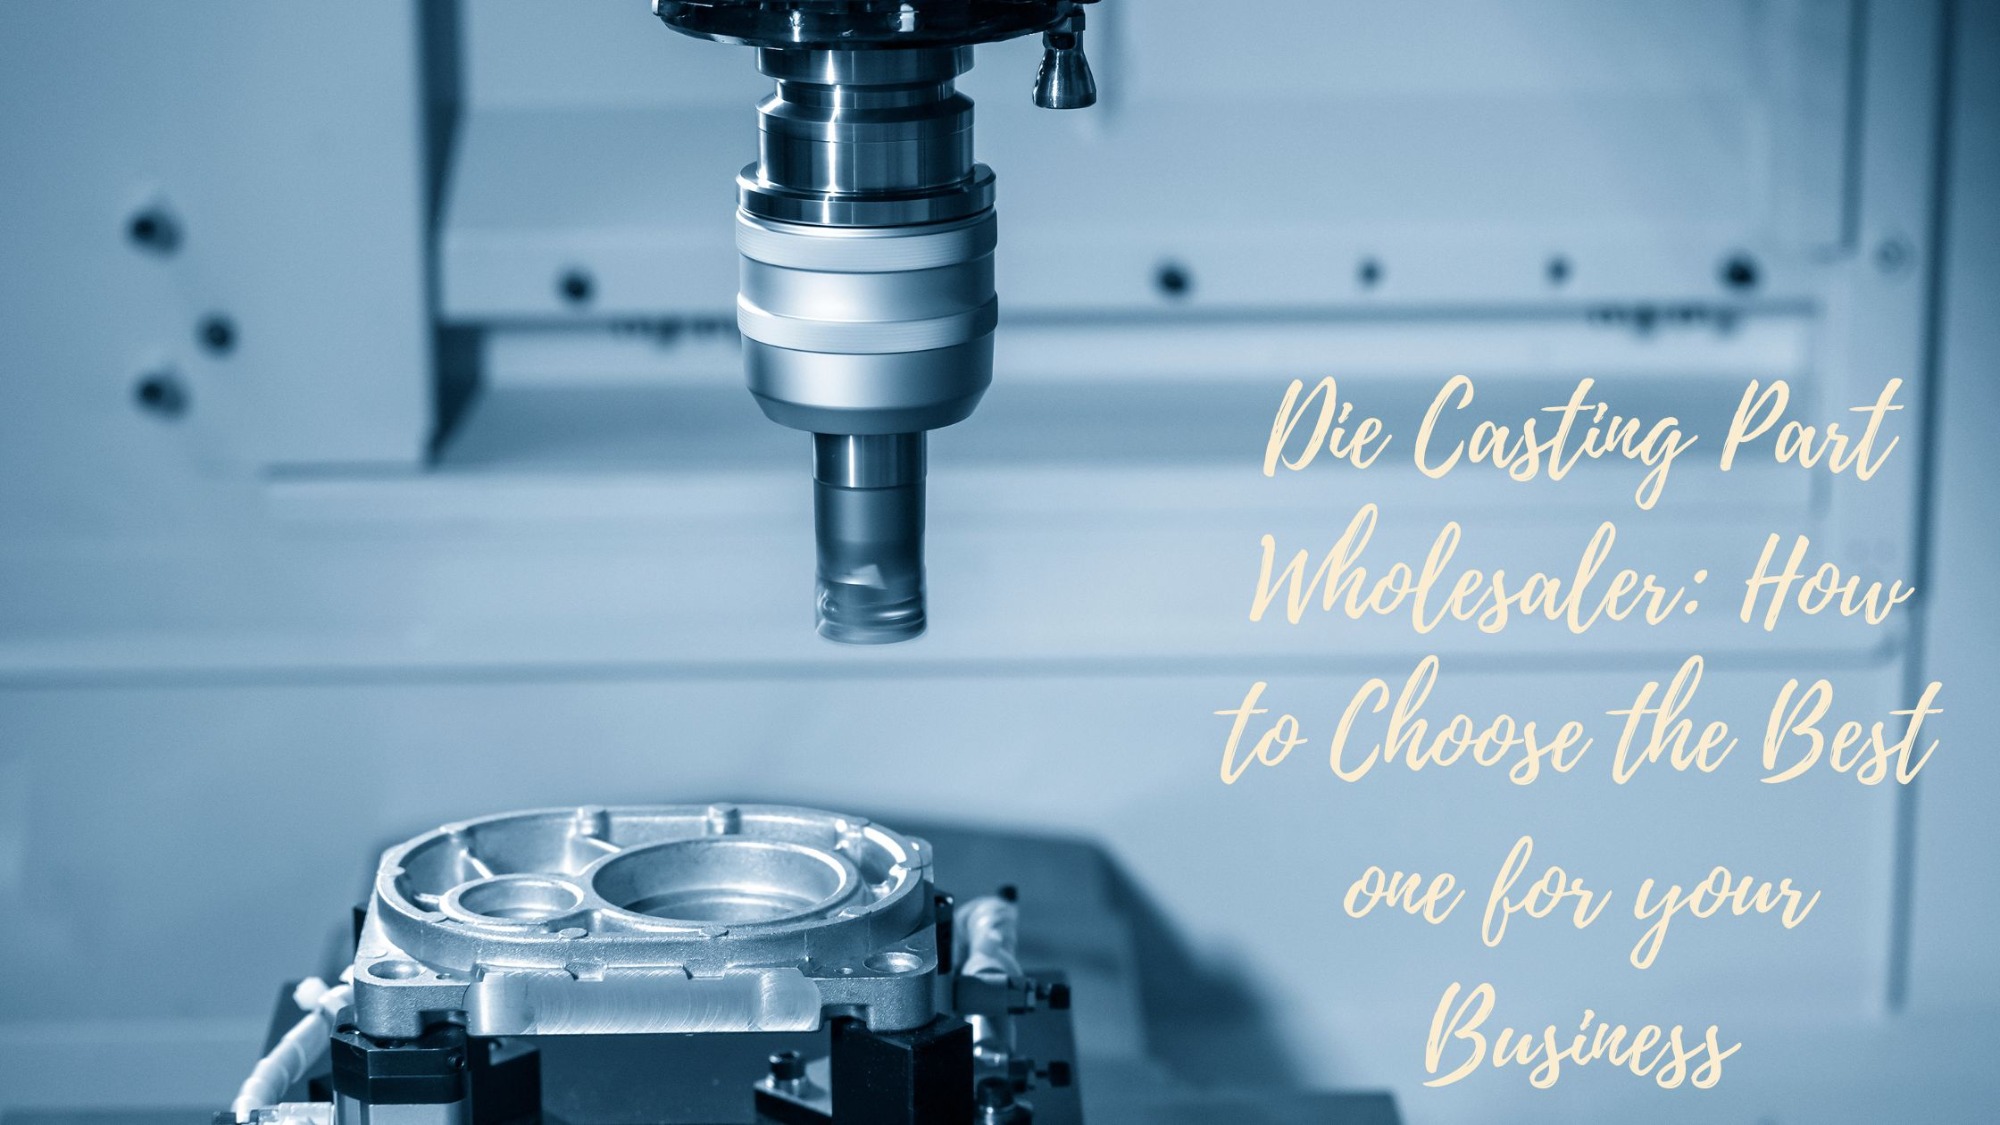 Die Casting Part Wholesaler: How to Choose the Best one for your Business